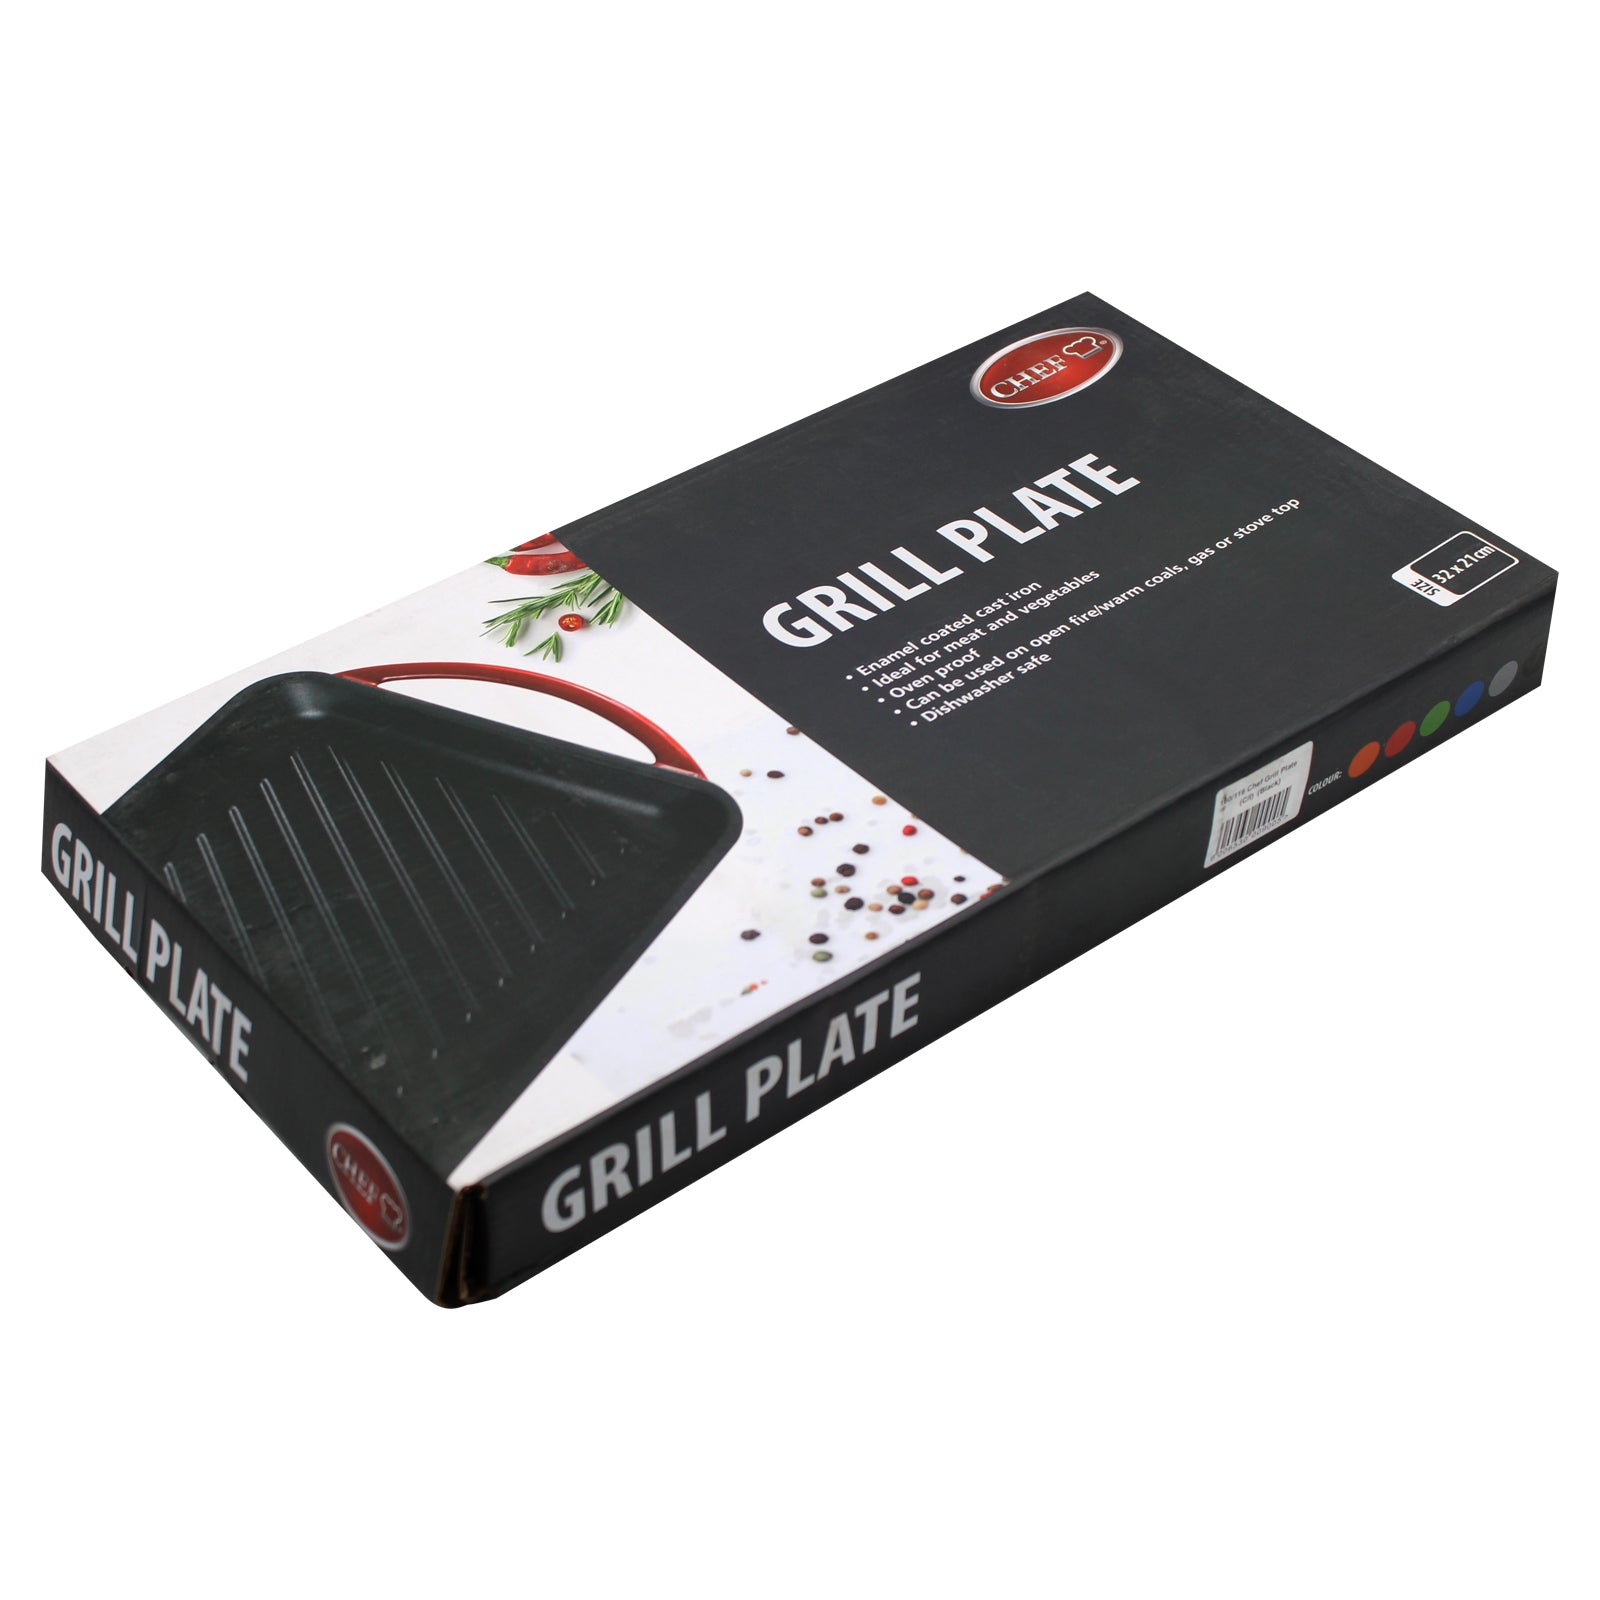 Chef Grill Plate in Box